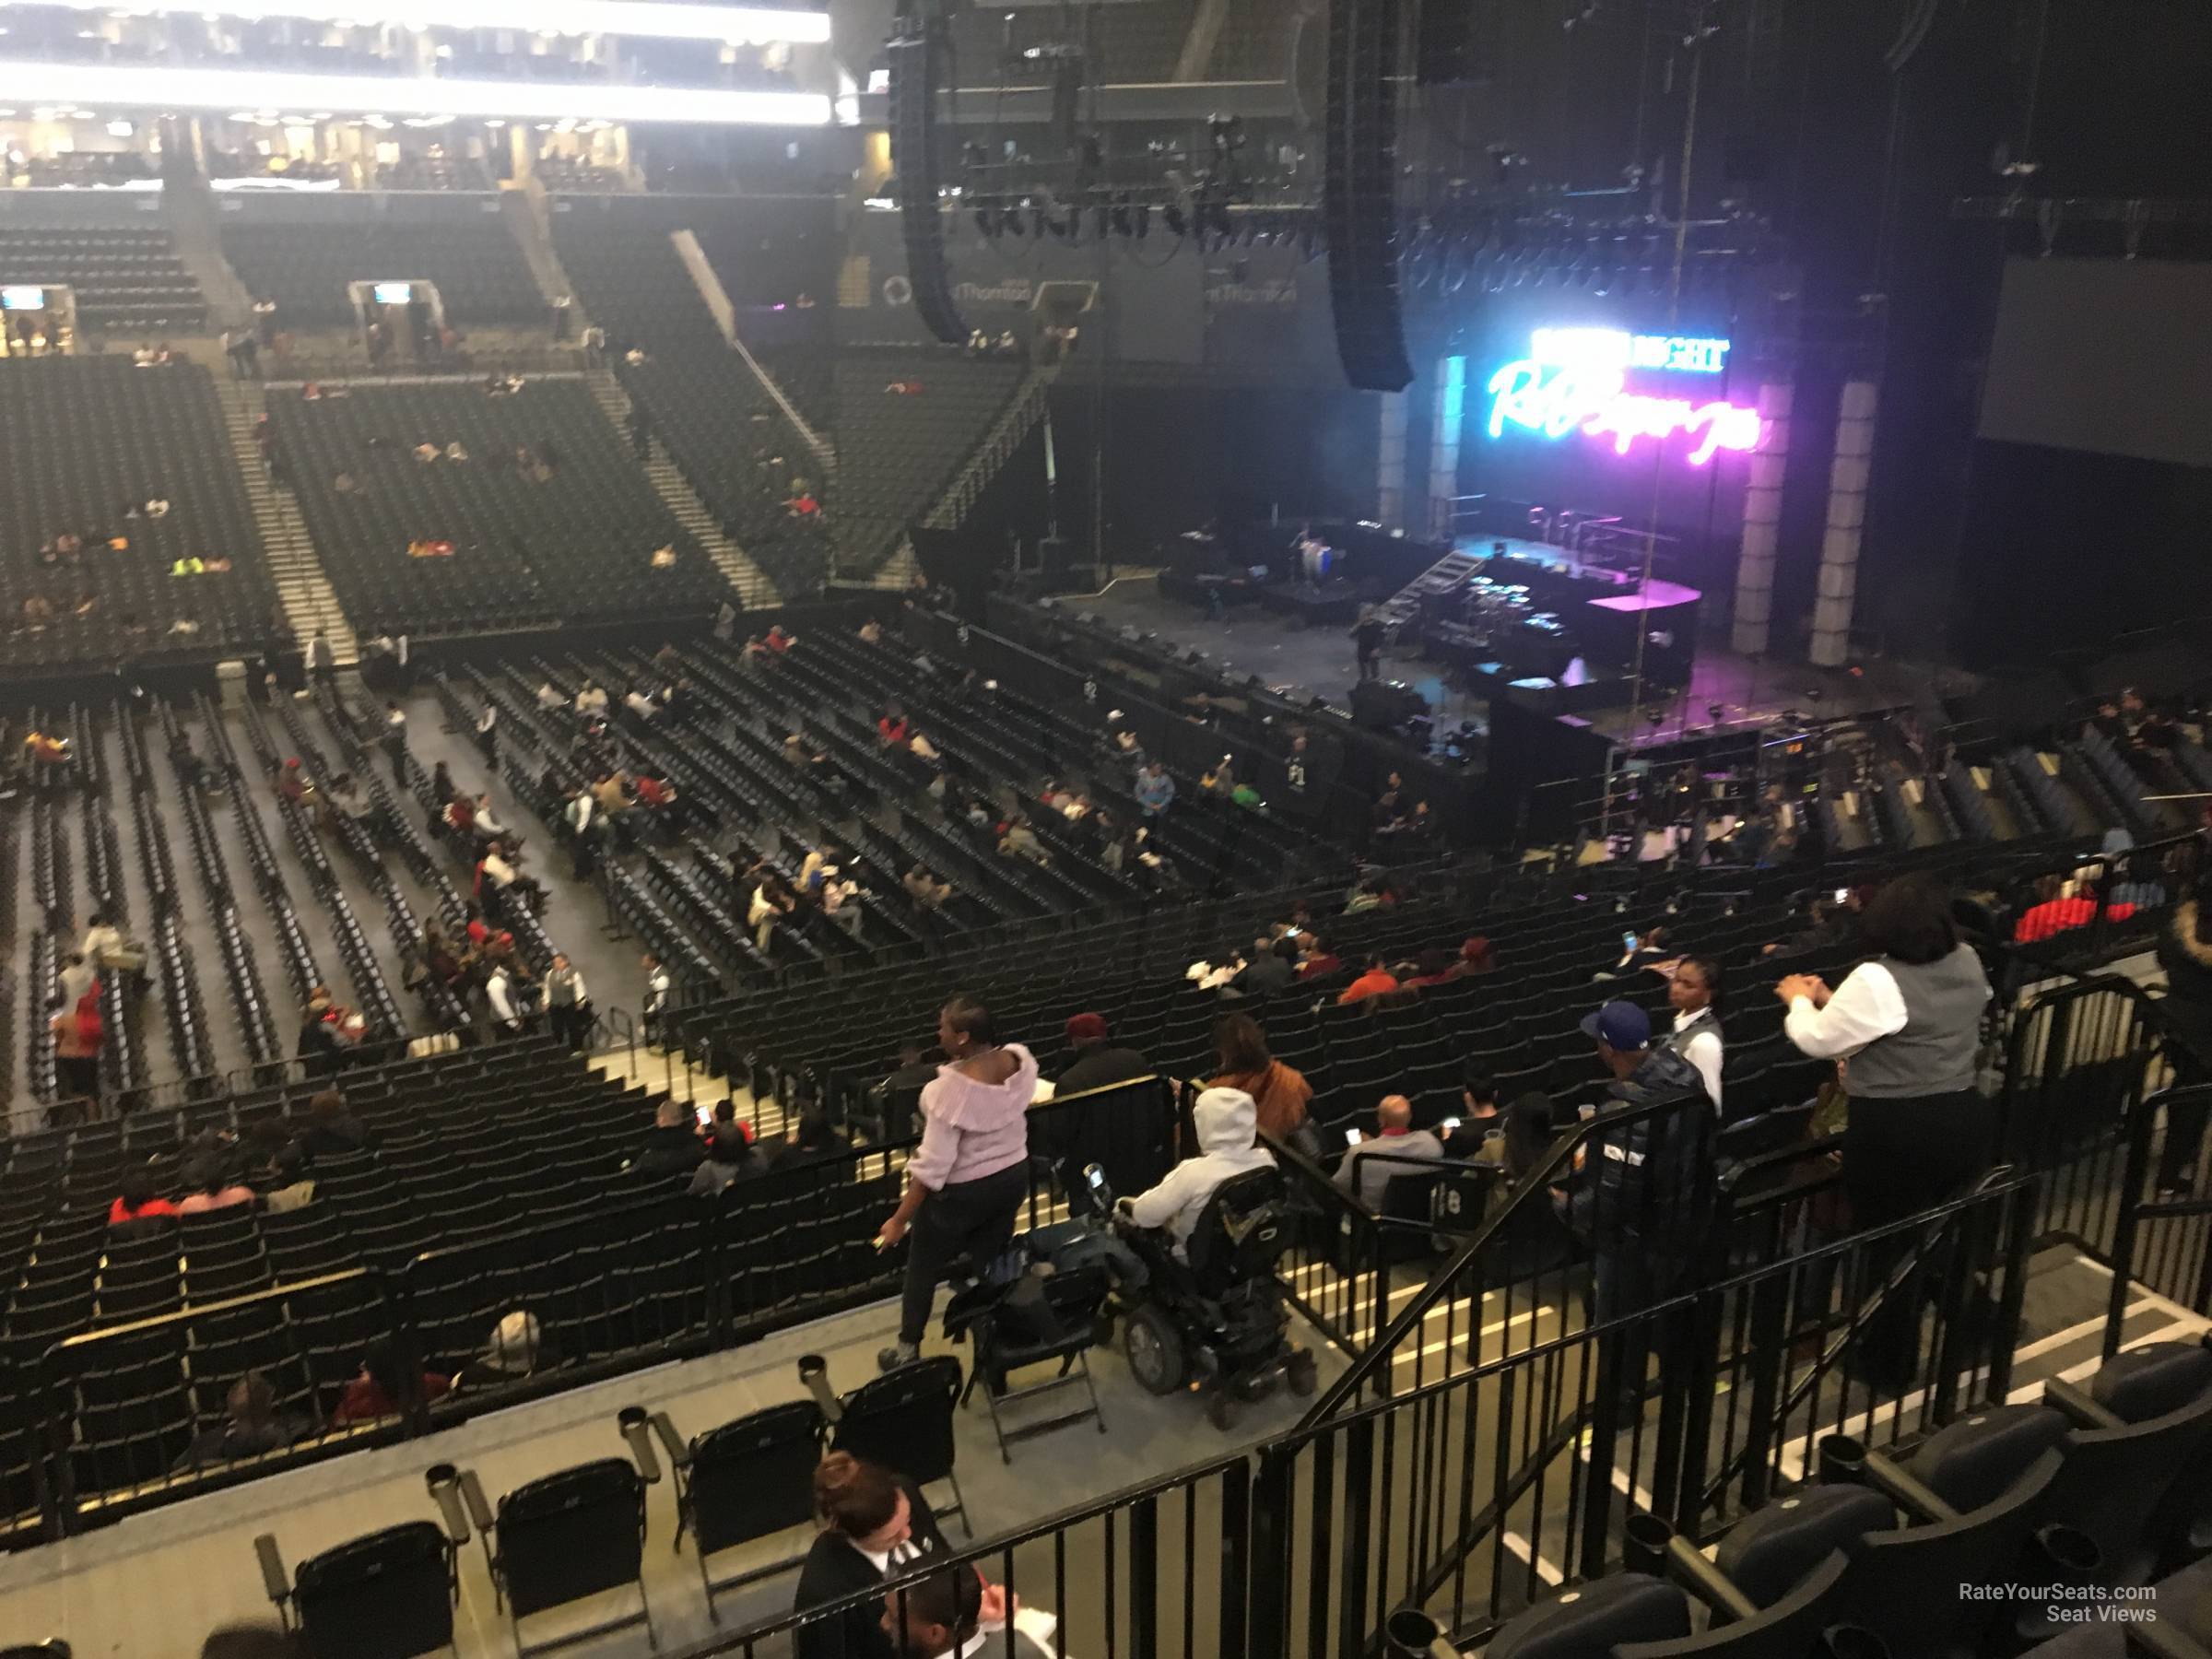 Section 108 at Barclays Center for Concerts